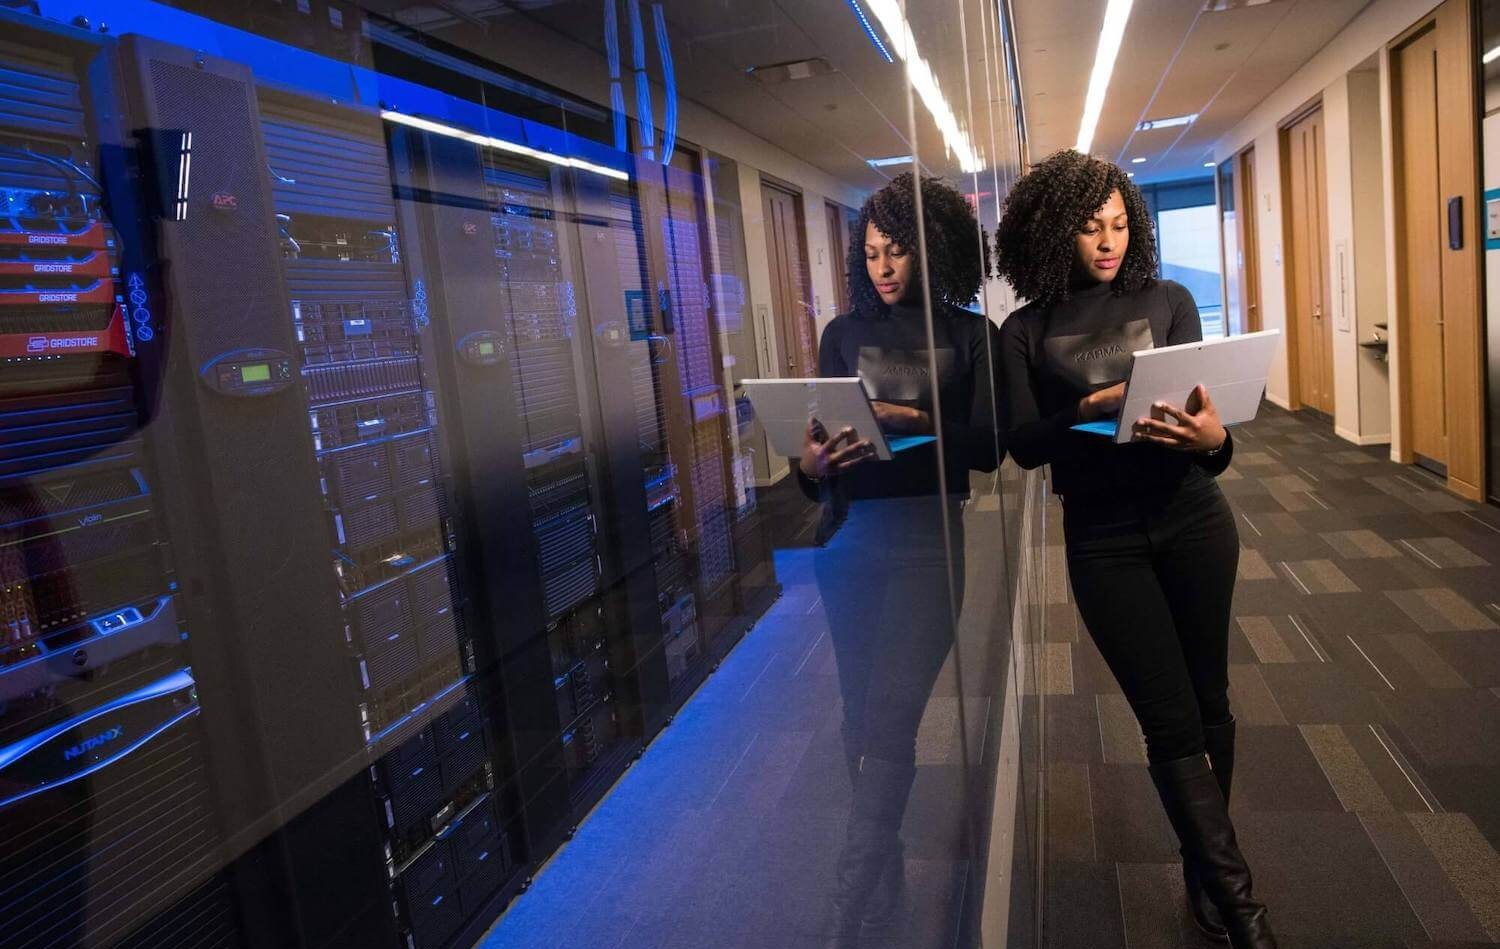 woman standing next to servers with laptop